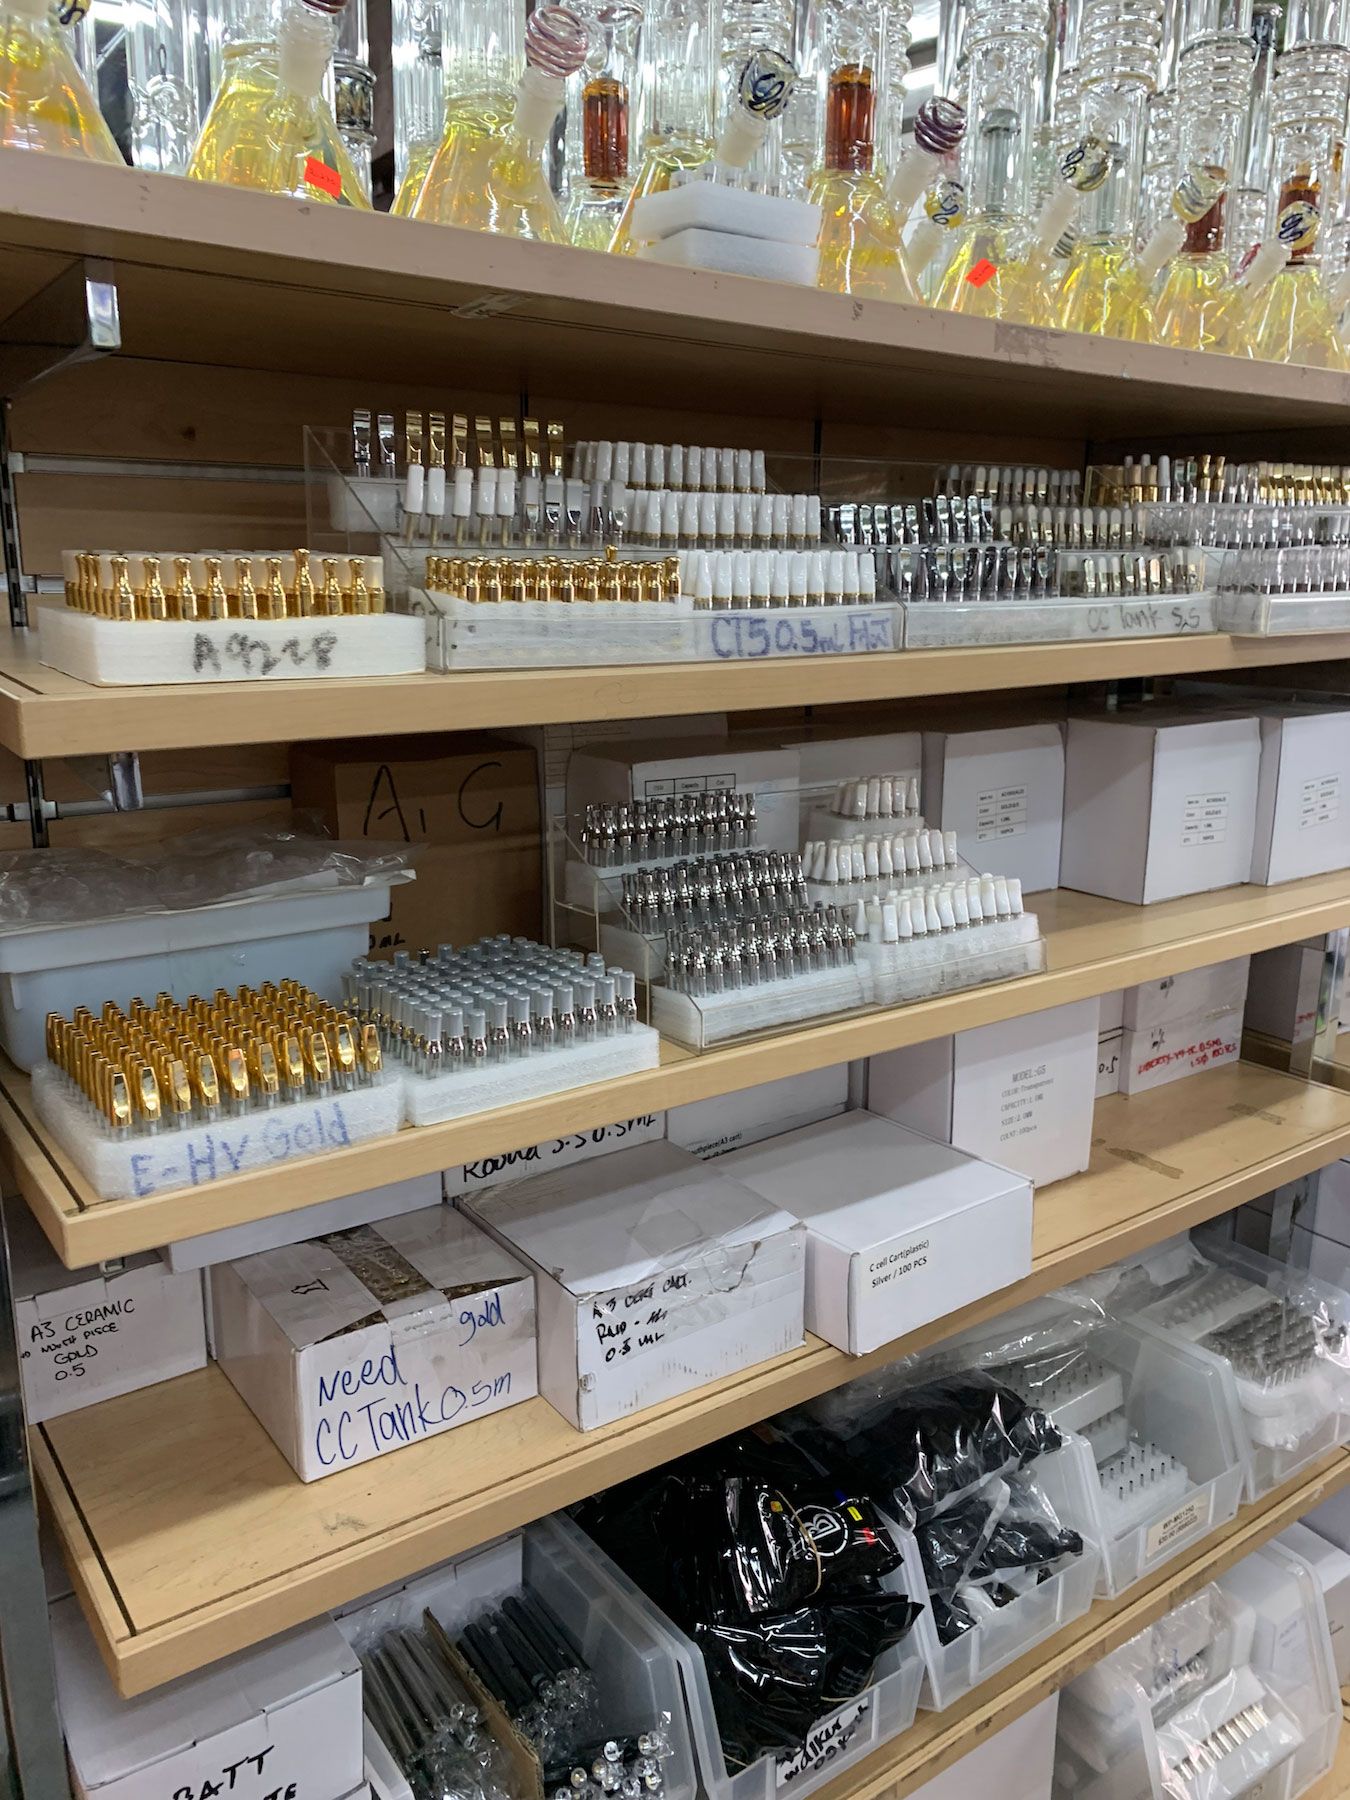 Every type of vape cart, for wholesale in downtown LA. (David Downs/Leafly)